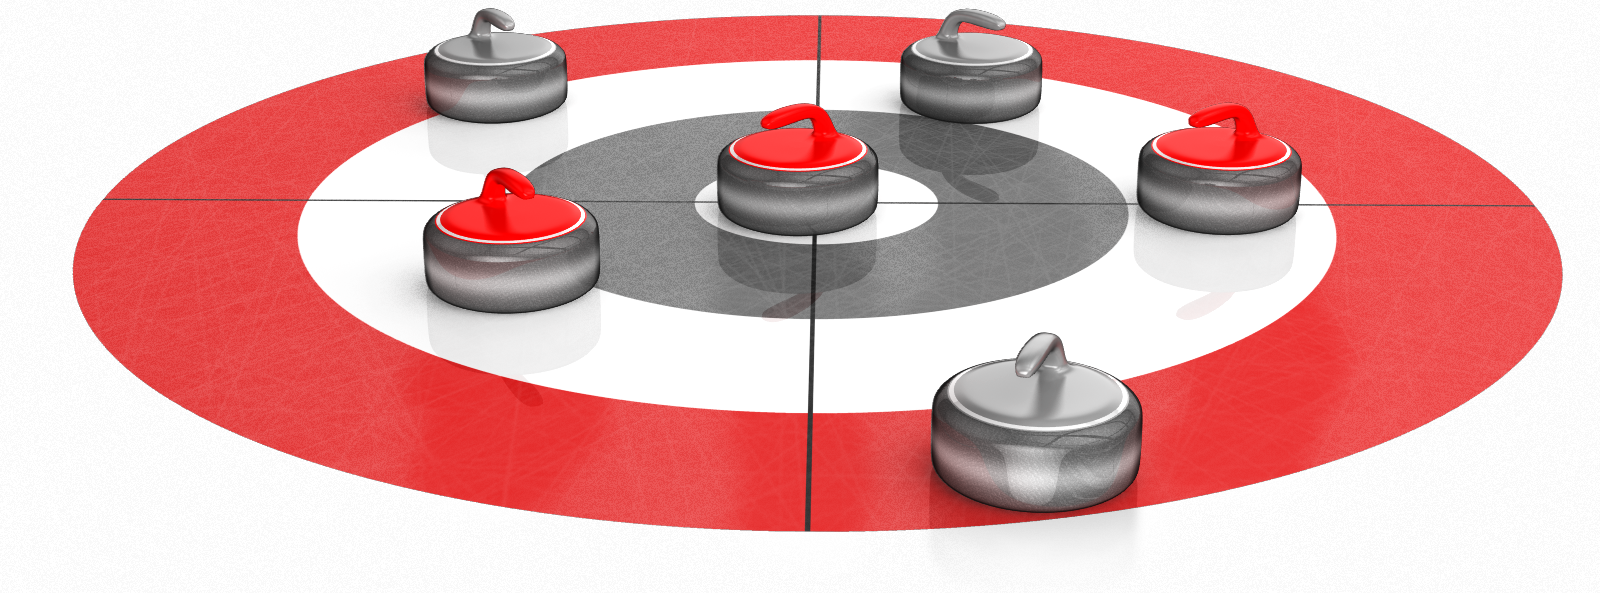 Download and share clipart about Curling Score 1600 Clr 15417 Throwing Curl...